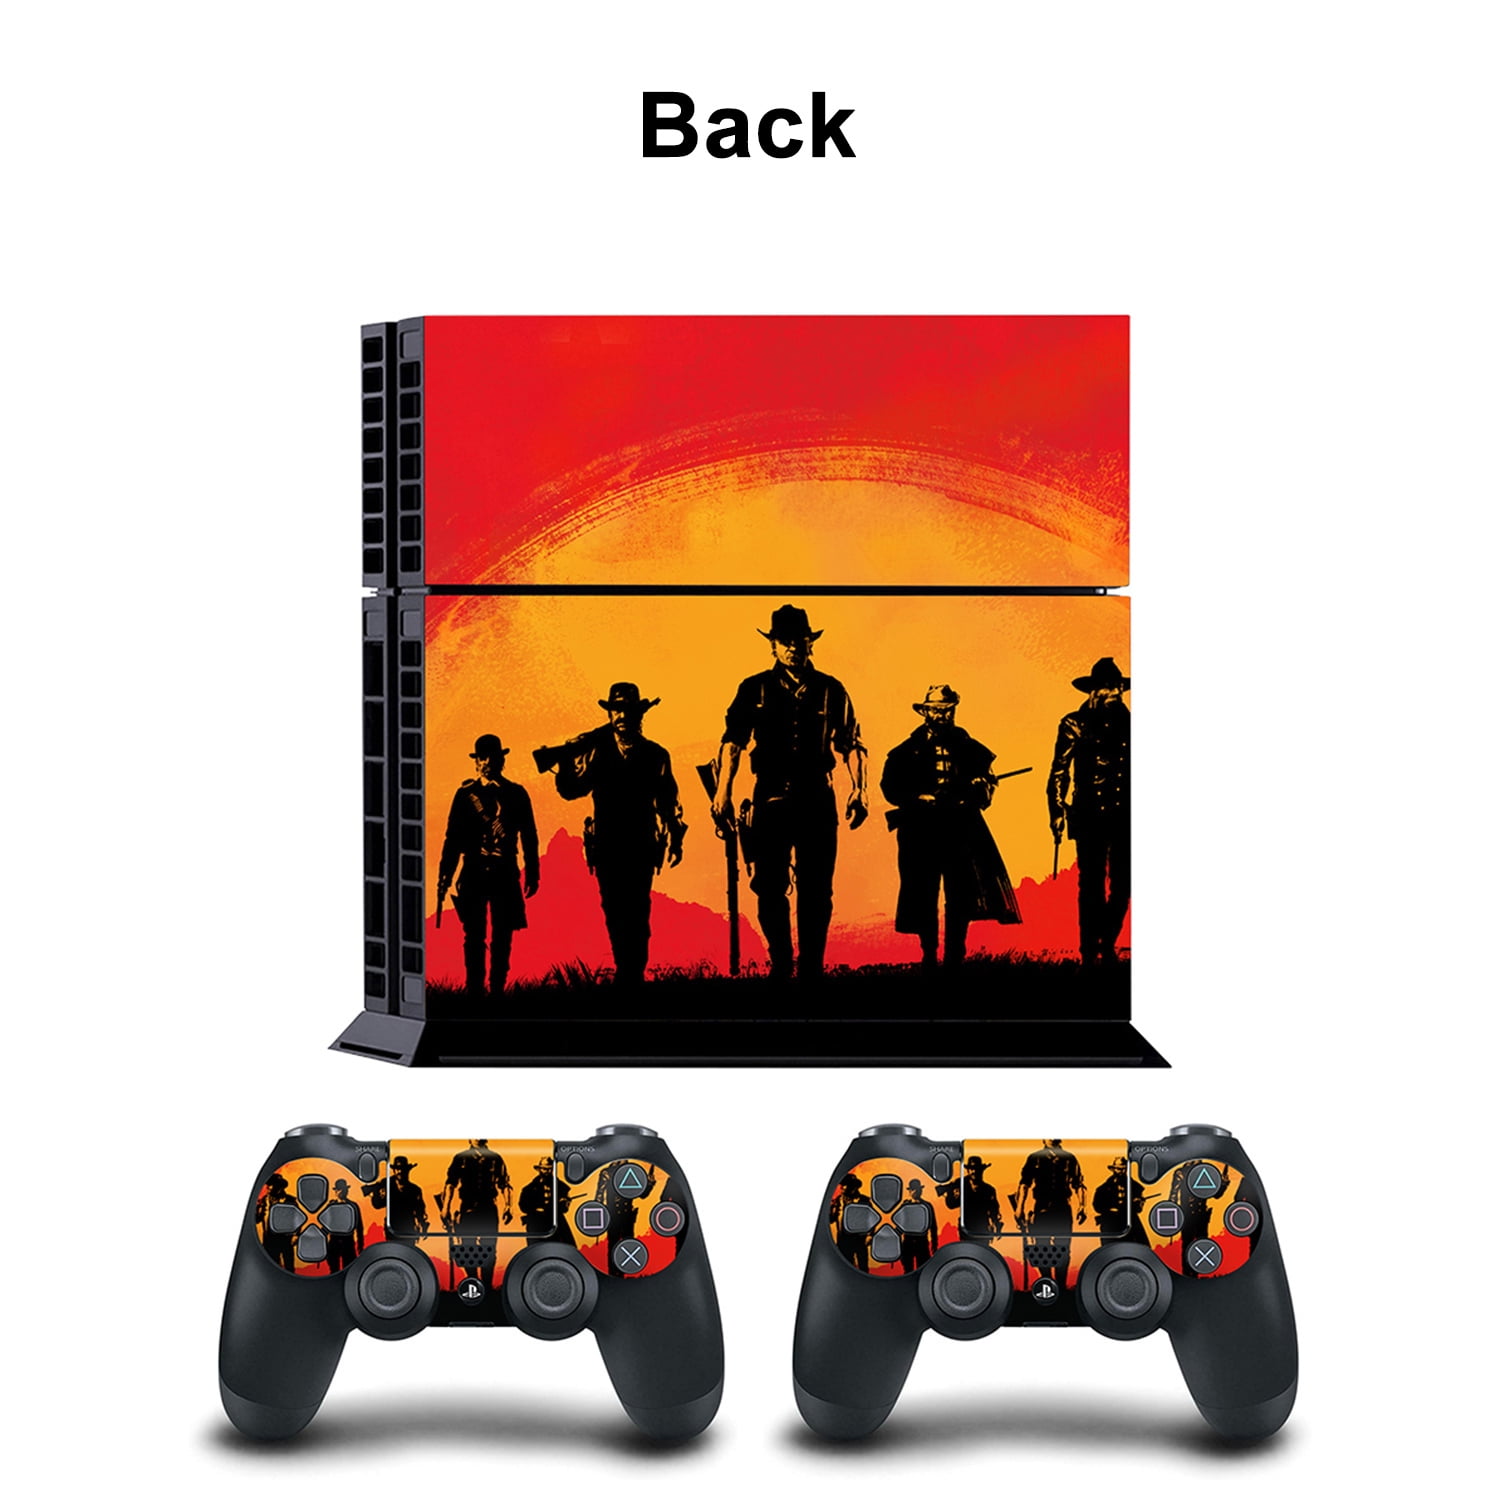 Red Dead Redemption 2 New Skin Sticker For Ps3 Super Slim 4000 And 2  Controller Skins Tn-ps3s4000-5125 - Stickers - AliExpress